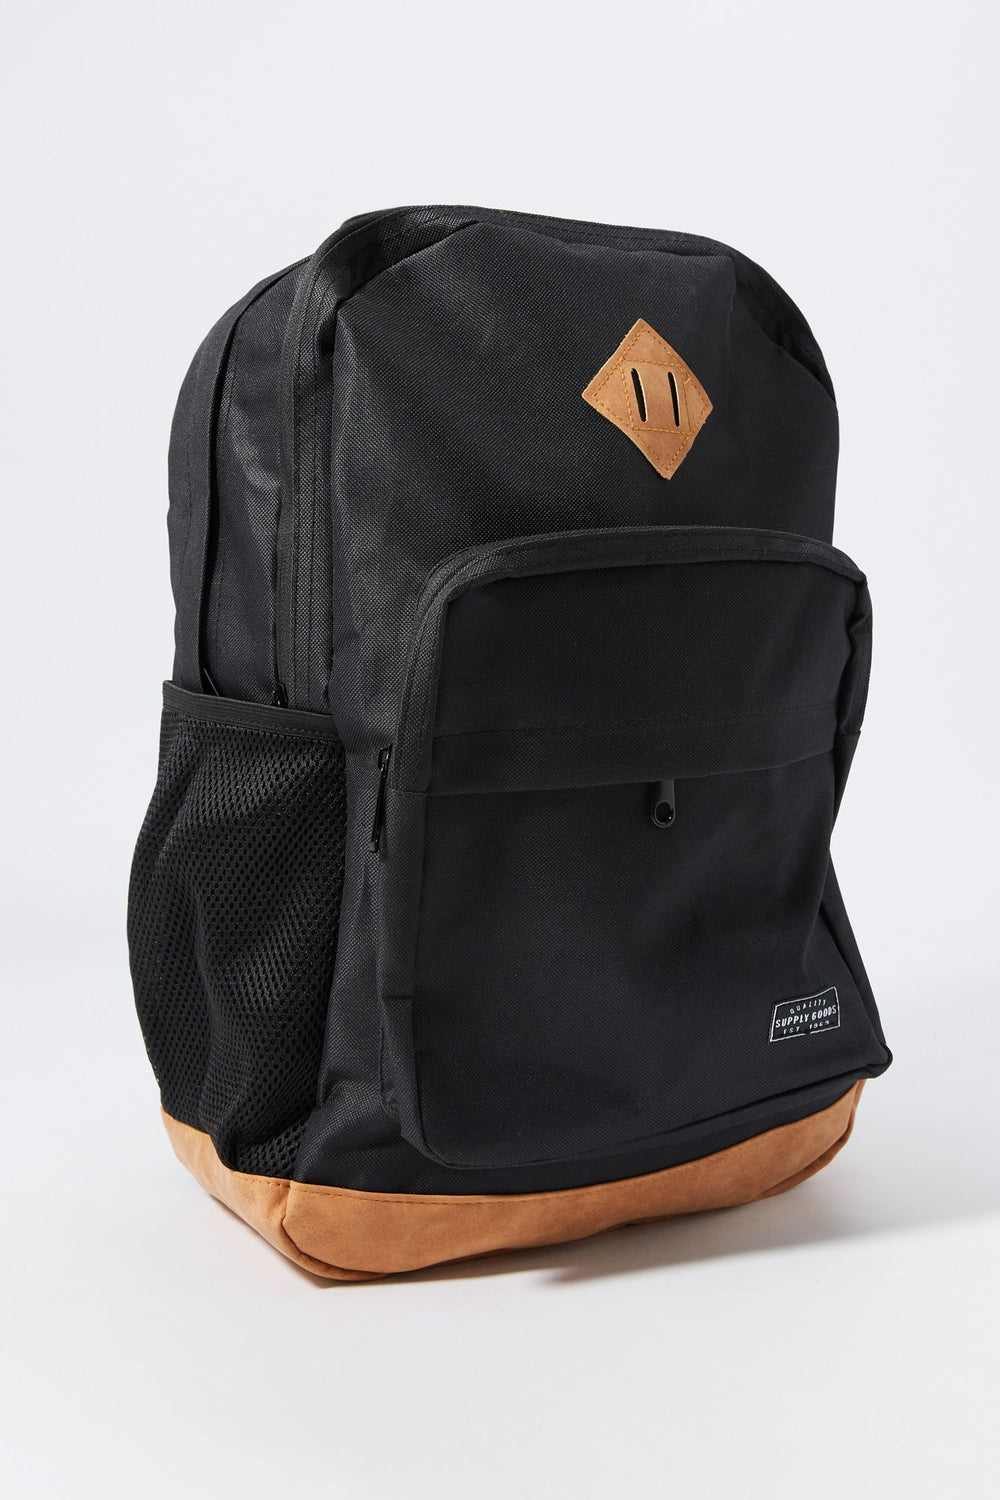 Black Multi Compartment Backpack Black Multi Compartment Backpack 2